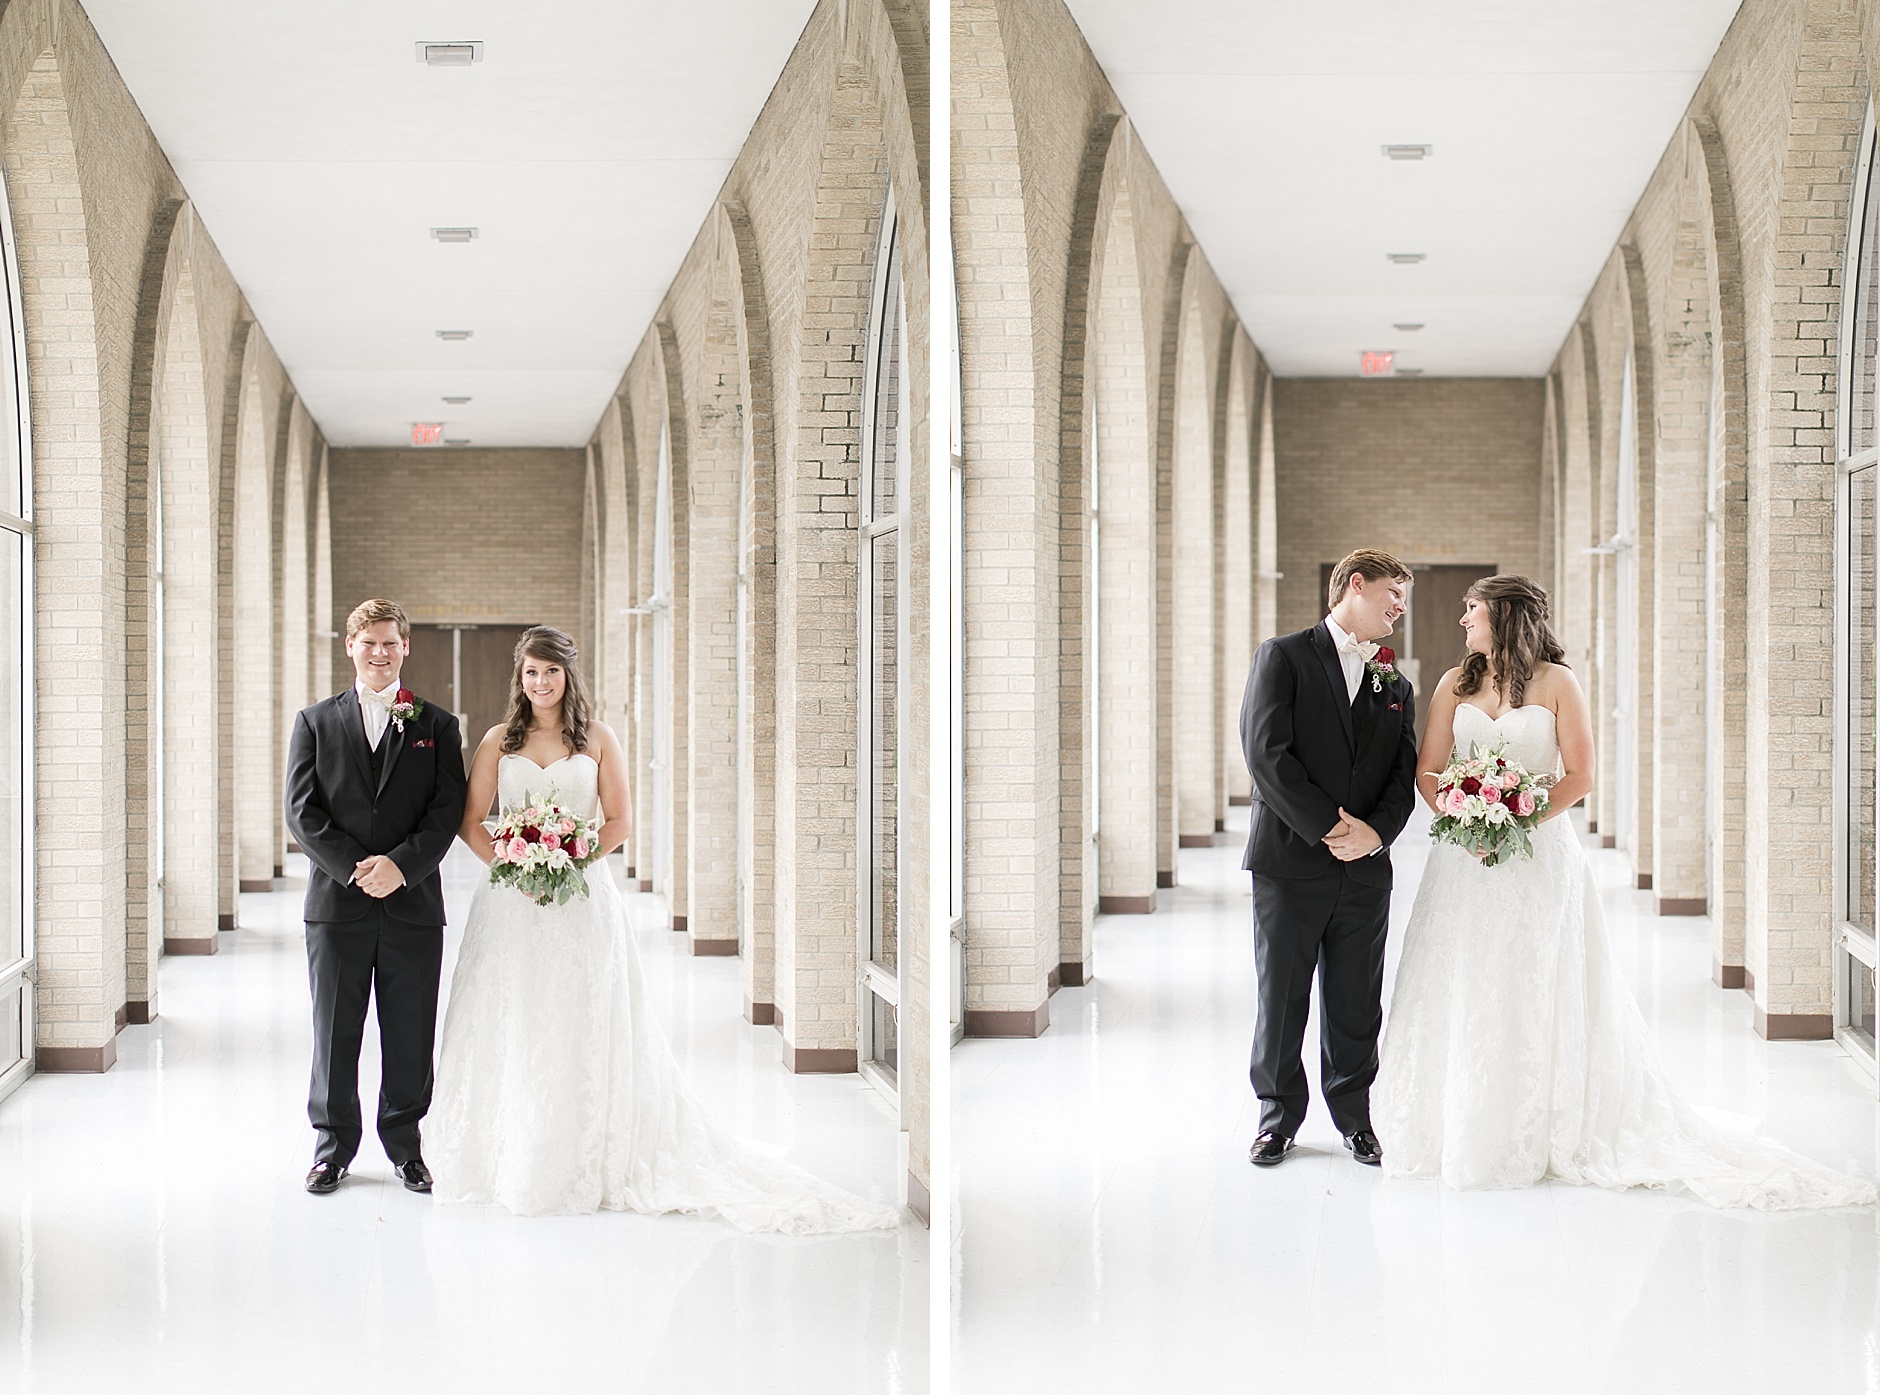 A Late Summer Early Fall Wedding in Downtown Paducah Kentucky by Rachael Houser Photography